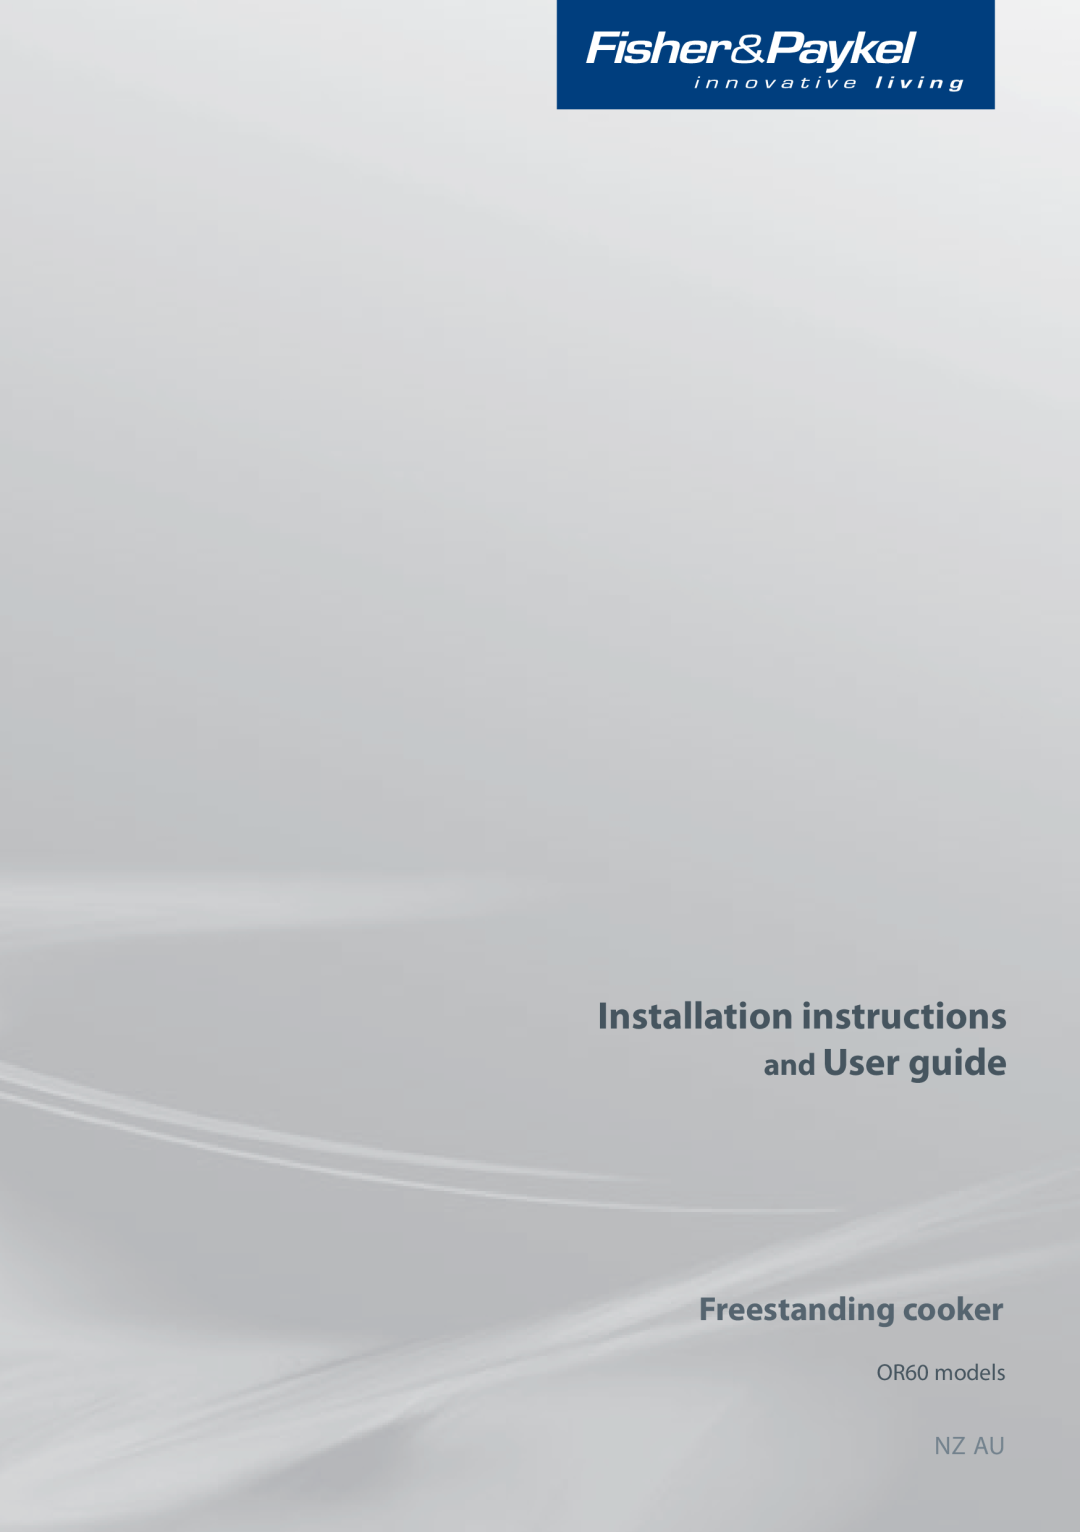 Fisher & Paykel OR60 installation instructions Installation instructions and User guide, Freestanding cooker, Nz Au 